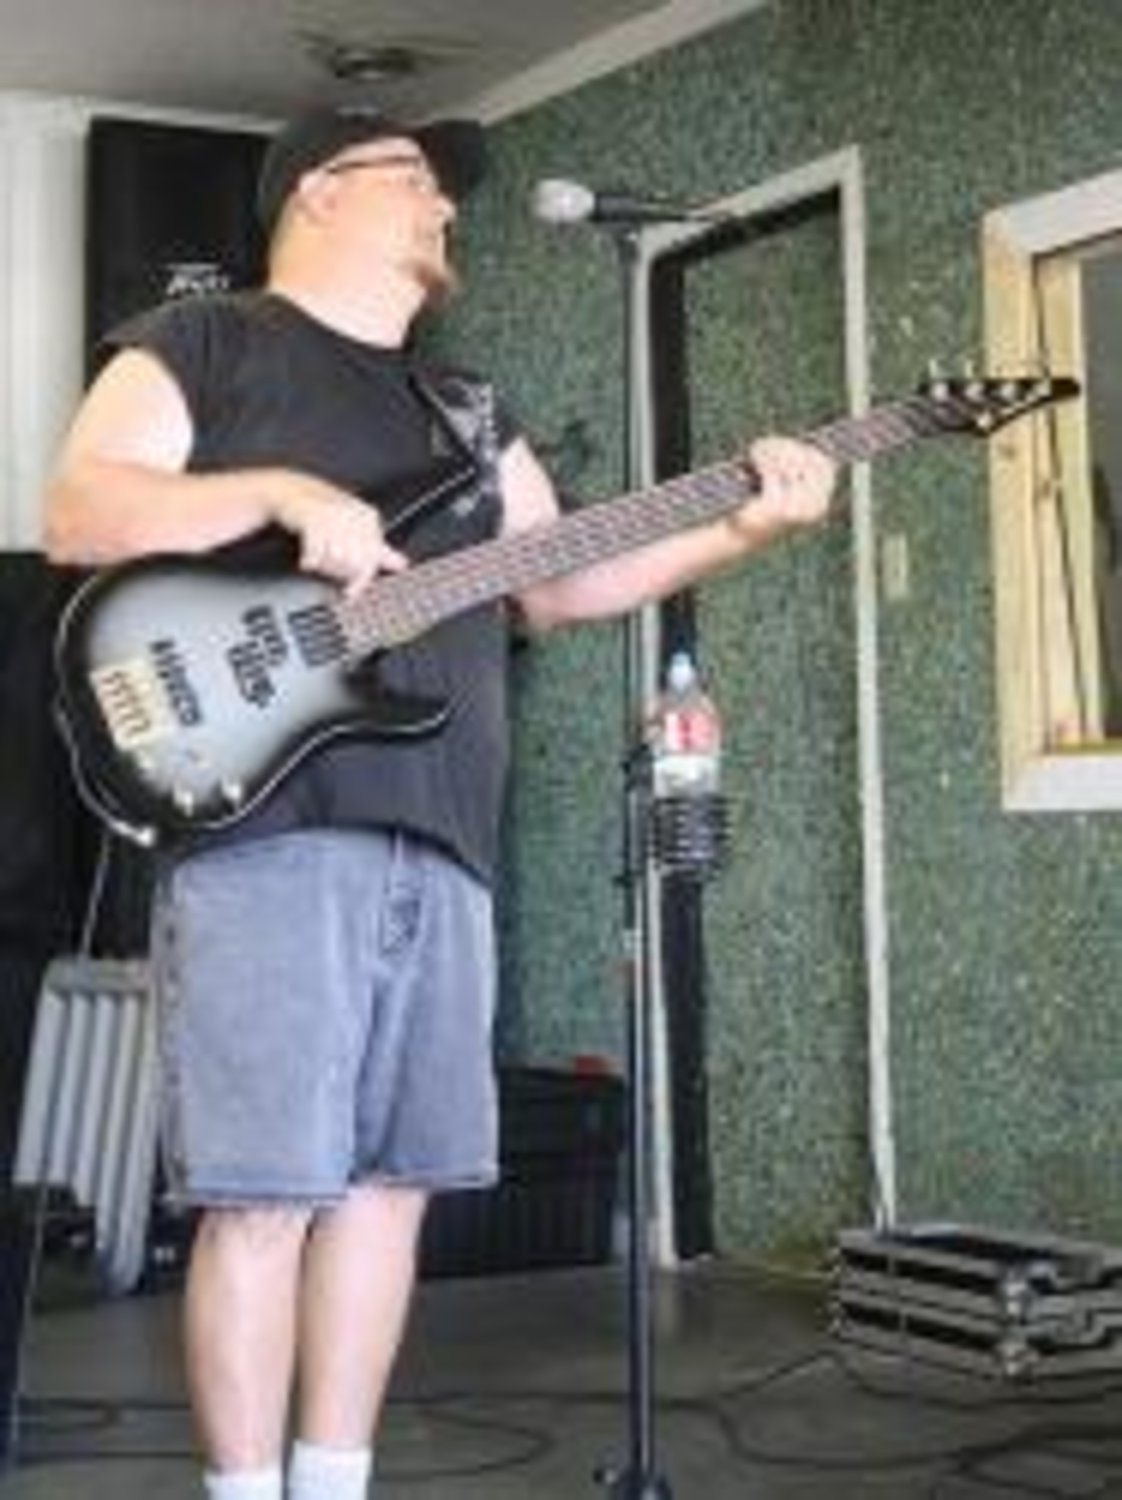 Les Paul Clanton, from Alba, Texas, has played bass with Whiskey Confessions Band for the past three months.